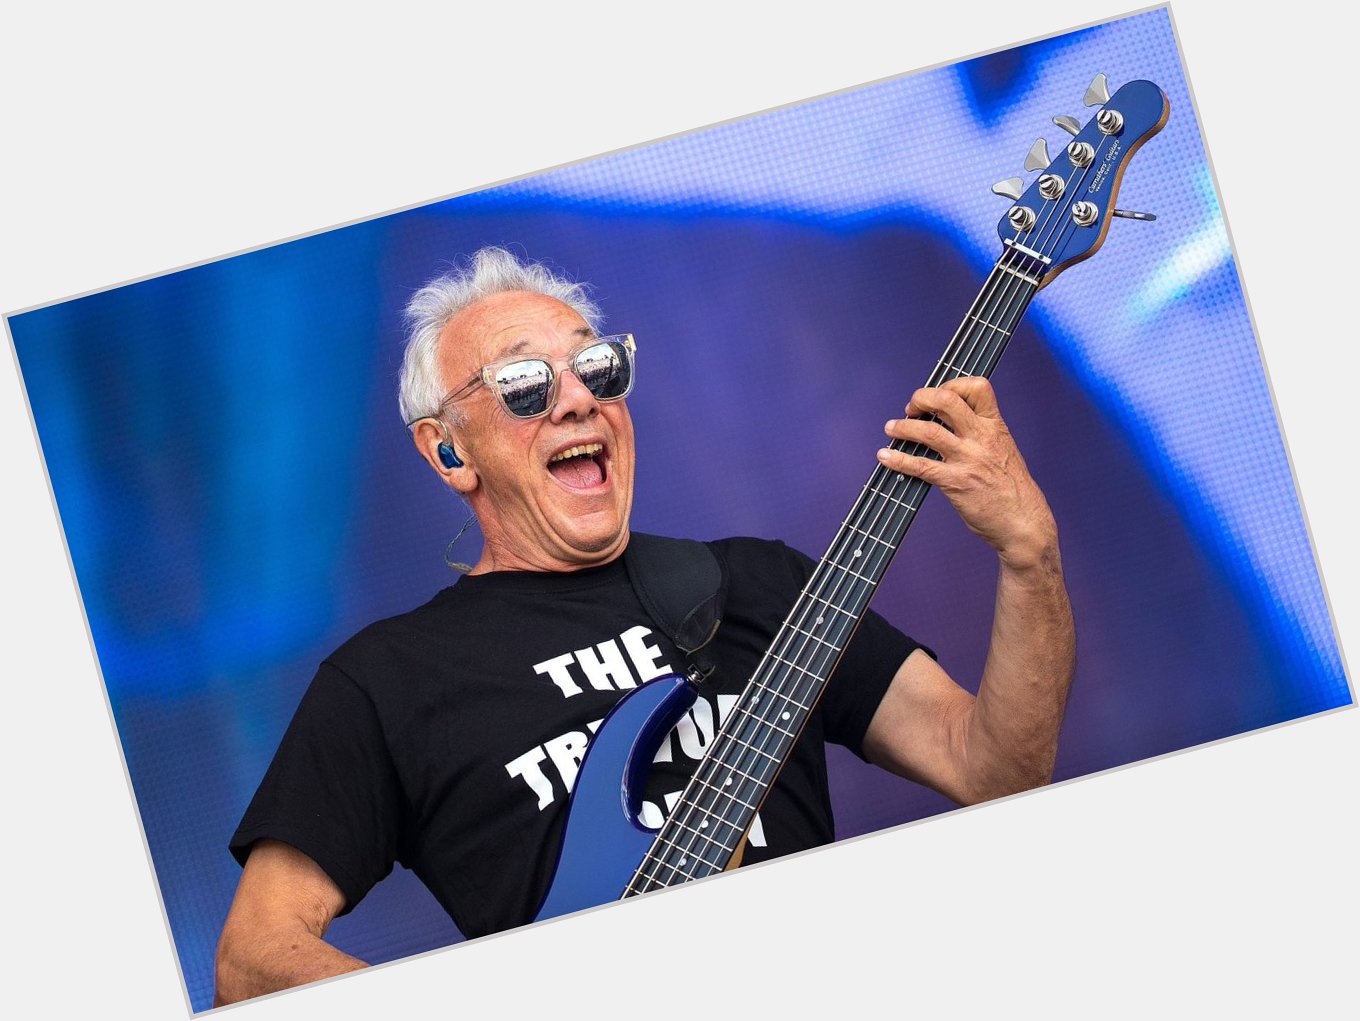 And a happy birthday to the great Trevor Horn!!! 